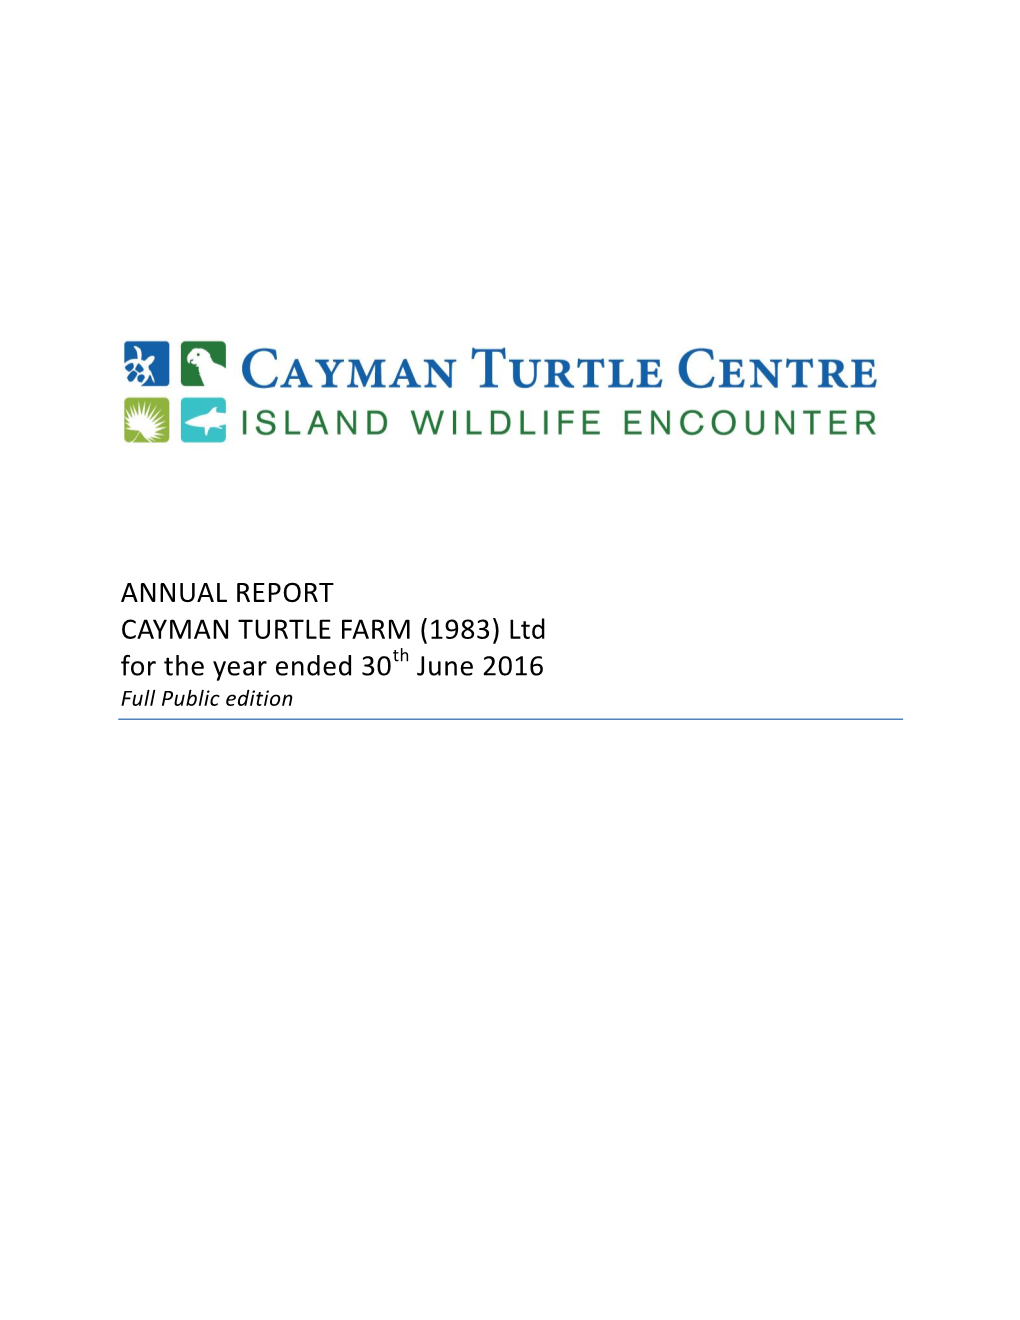 ANNUAL REPORT CAYMAN TURTLE FARM (1983) Ltd for the Year Ended 30Th June 2016 Full Public Edition